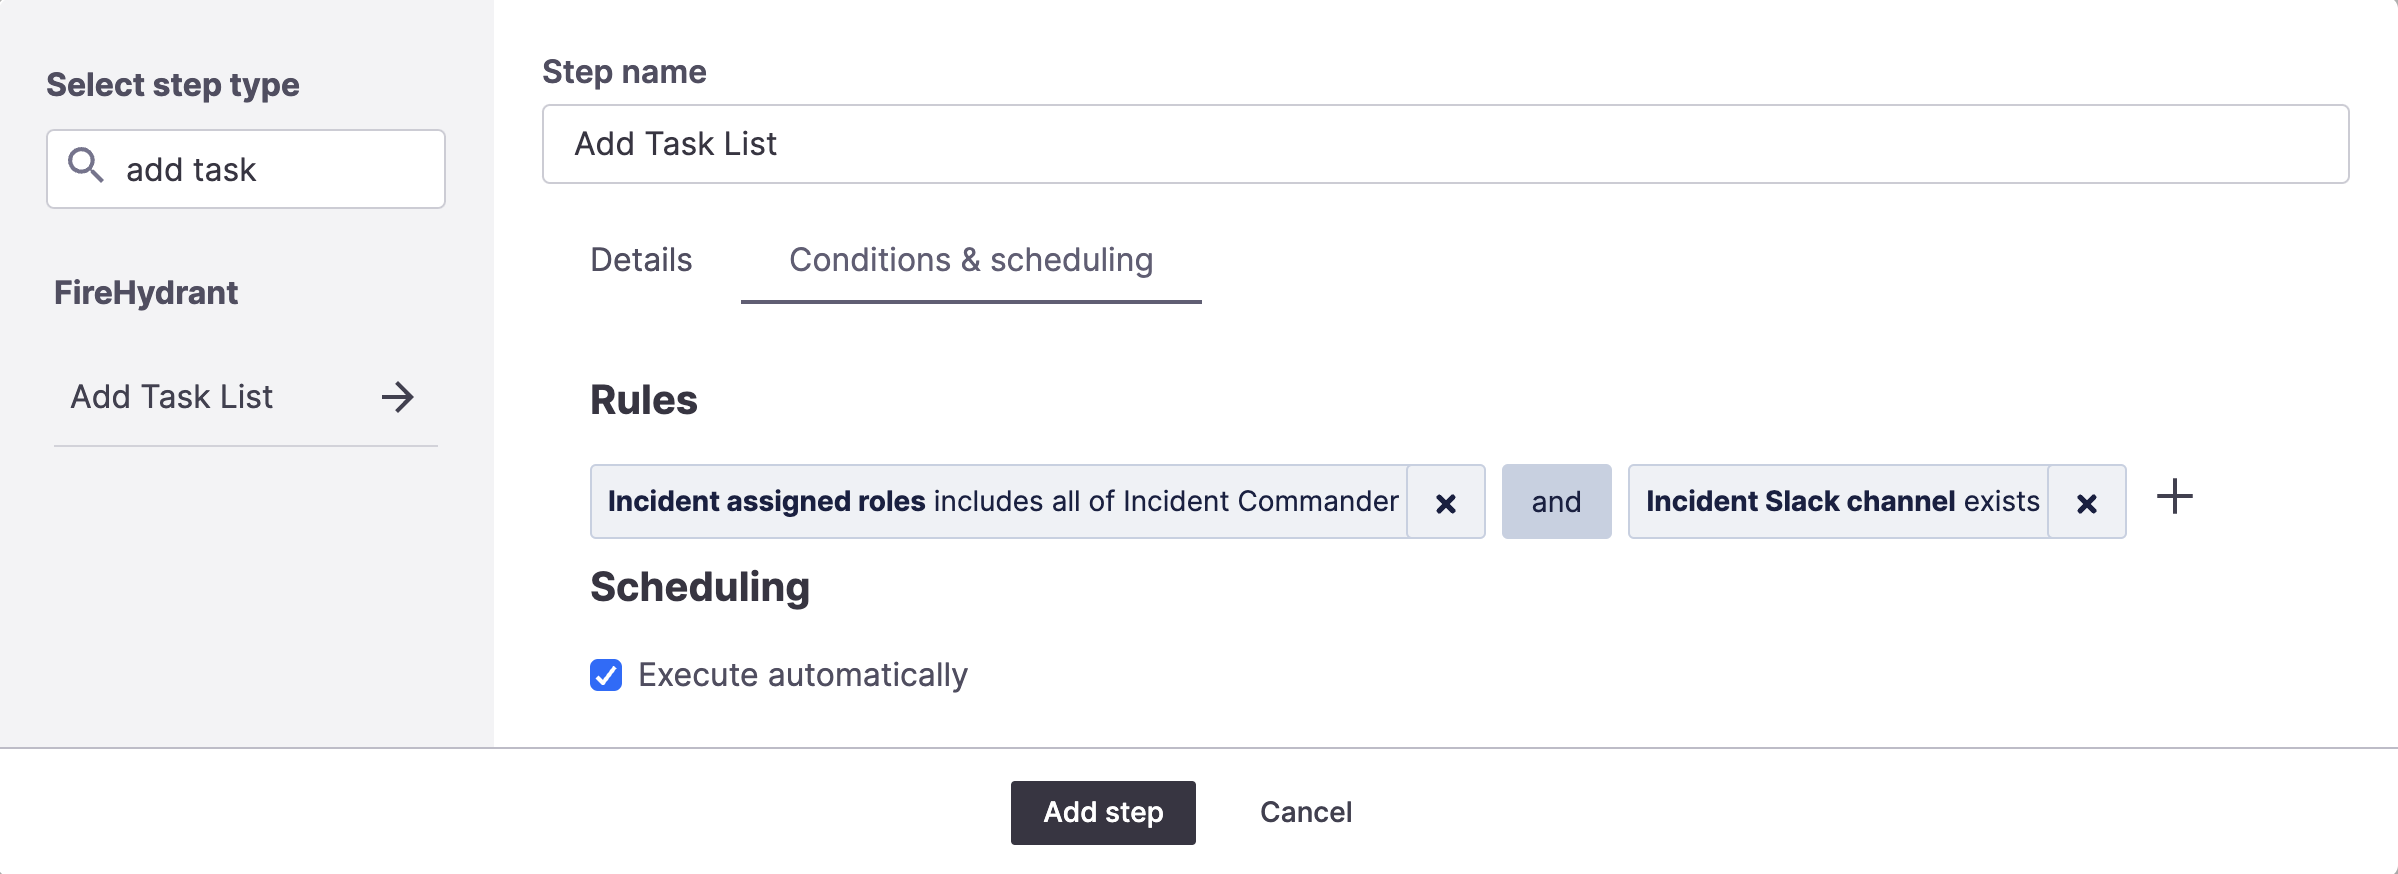 Example conditions on the Add Task List step